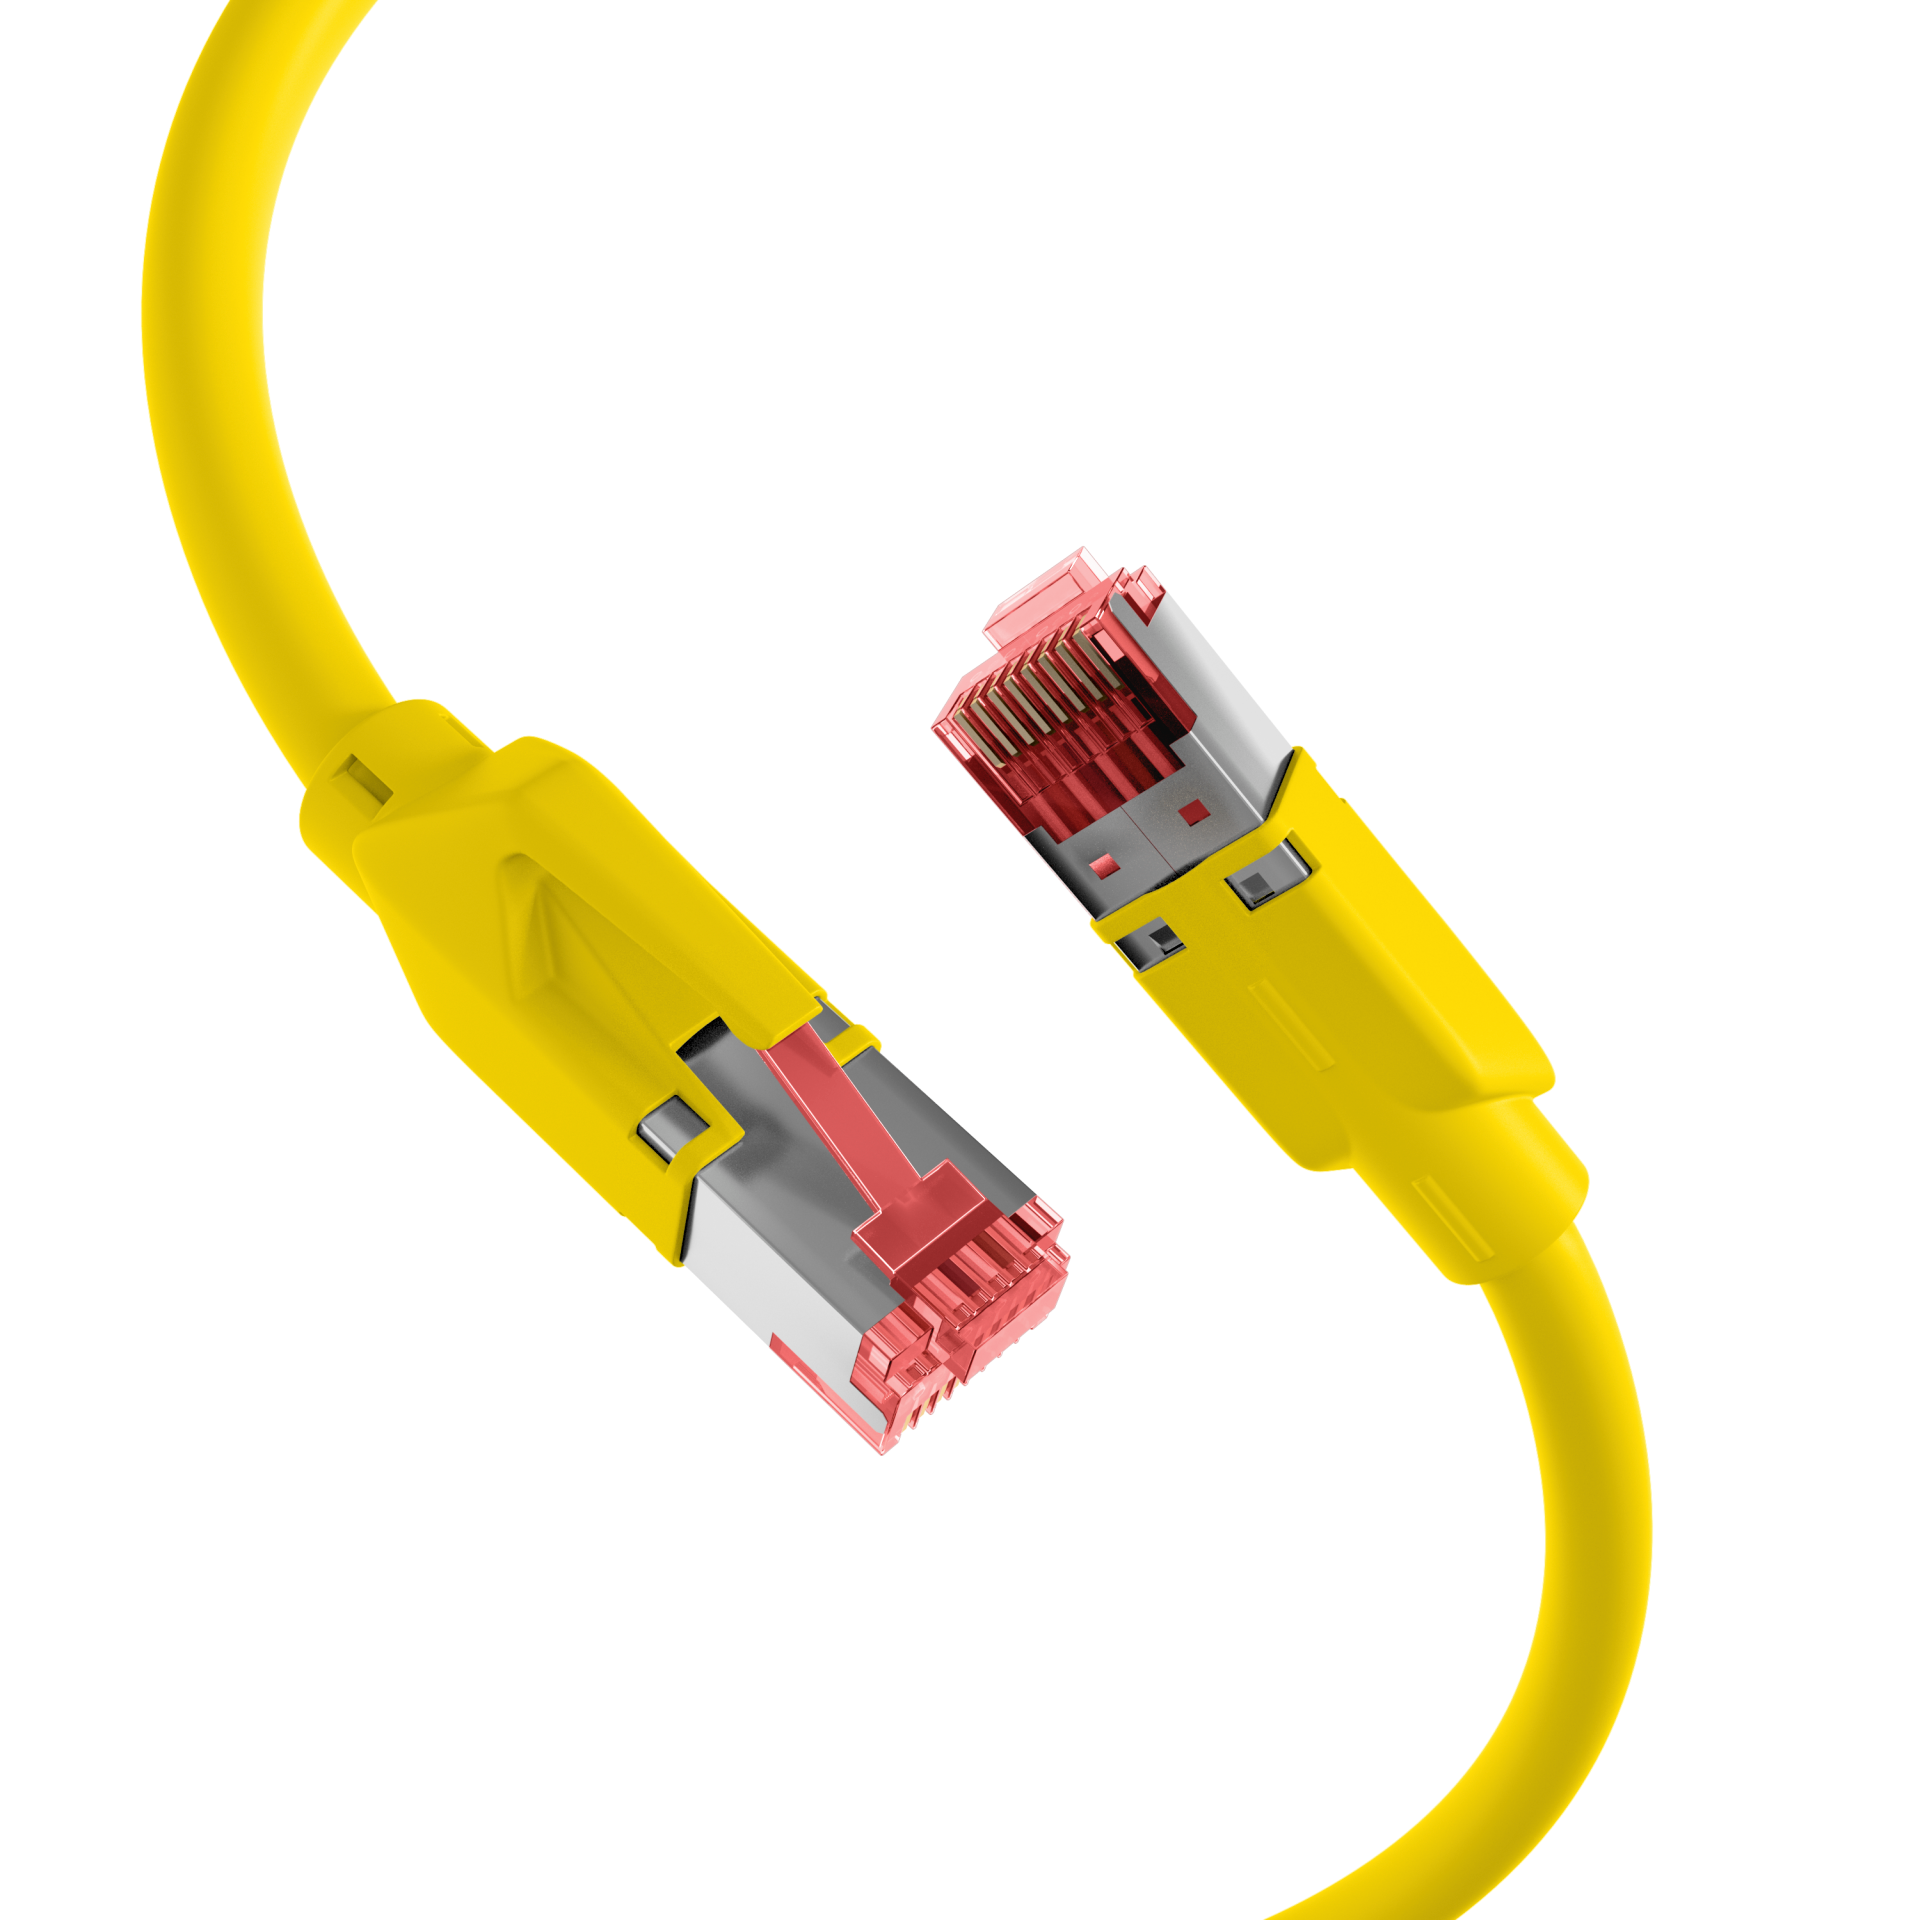 RJ45 Patch Cord Cat.5e SF/UTP PURTM21 for drag chains yellow 2m